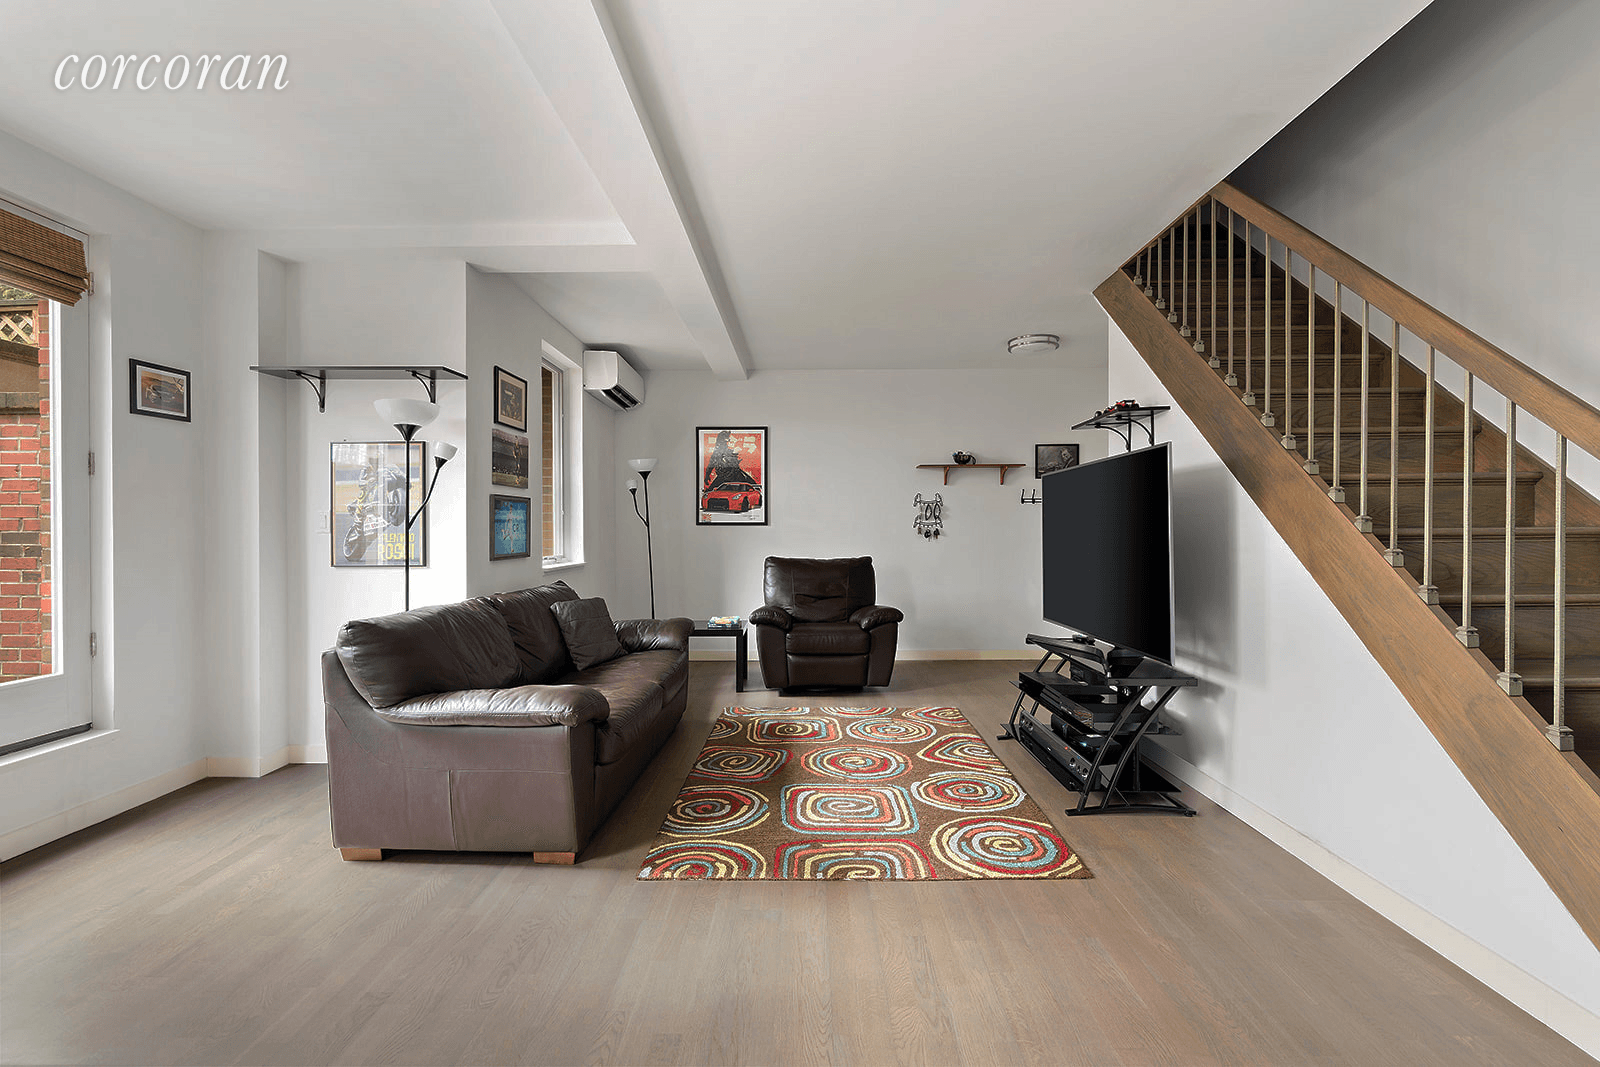 IN PERSON SHOWINGS AVAILABLE BY APPOINTMENTLike a house this 2 bedroom, 2 bathroom Park Slope duplex is modern and crisp, and at the same time, warm and inviting.